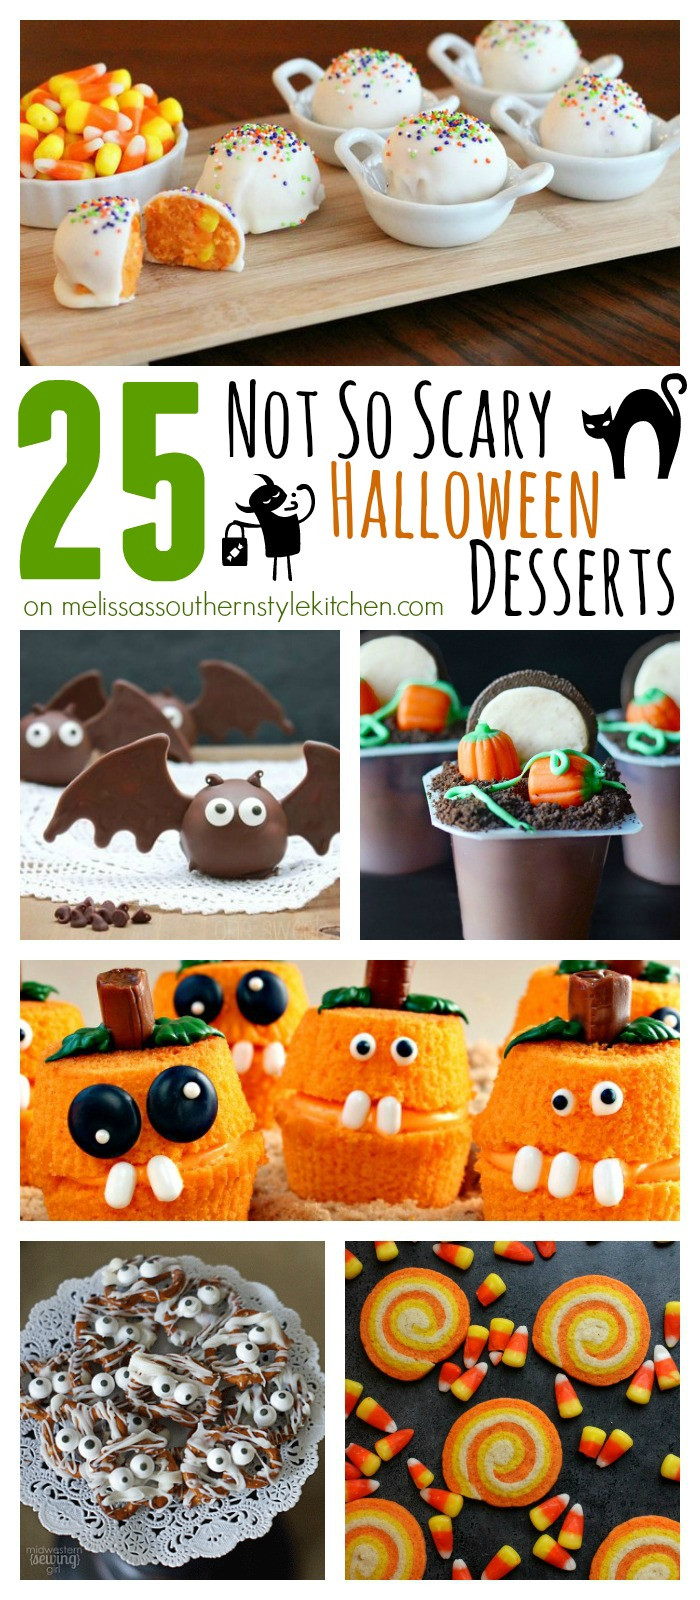 Scary Halloween Desserts
 25 Not So Scary Halloween Desserts